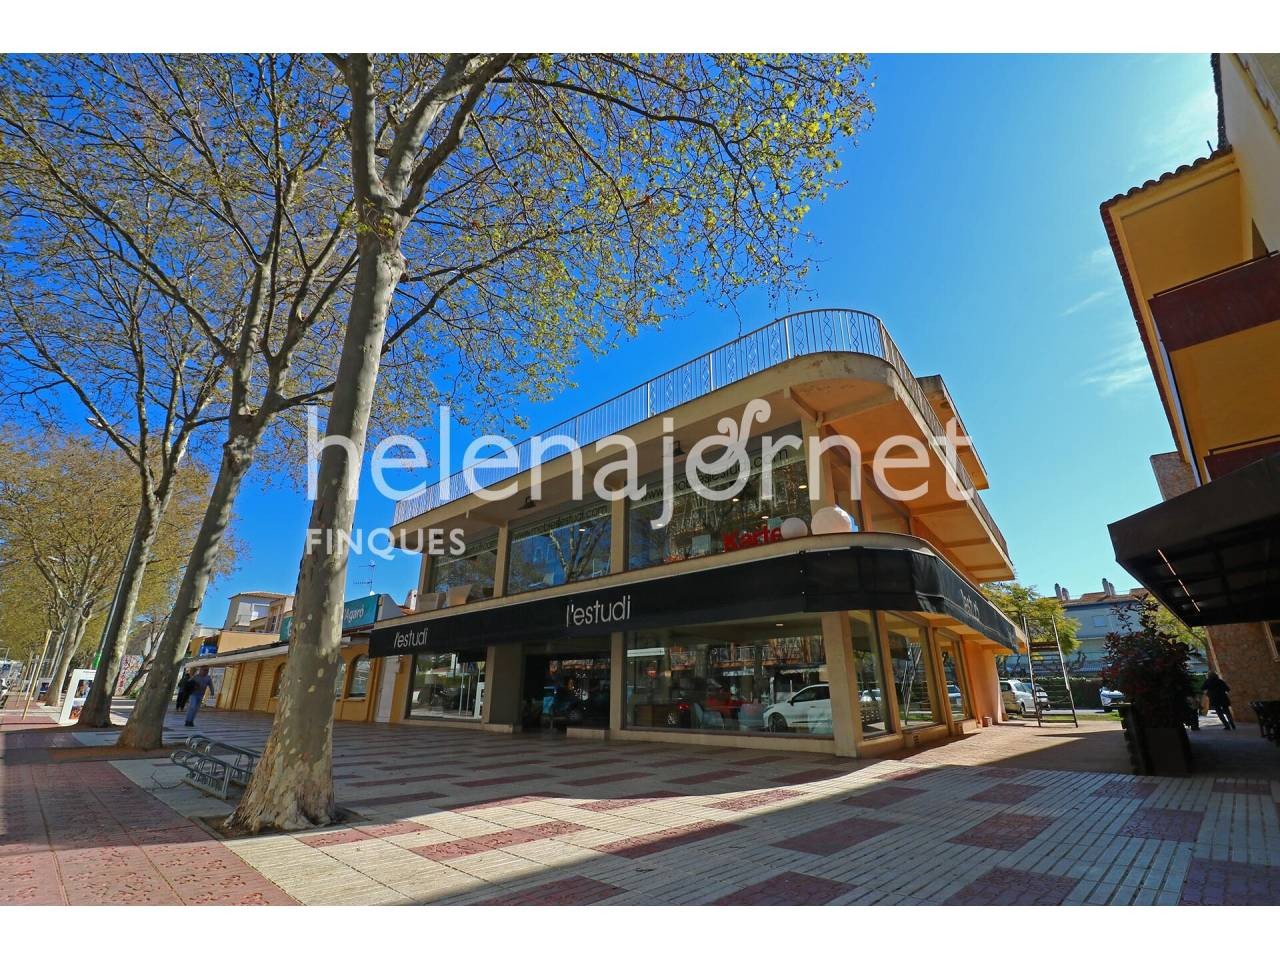 493 m2 local located in the center of S’Agaró - 2378